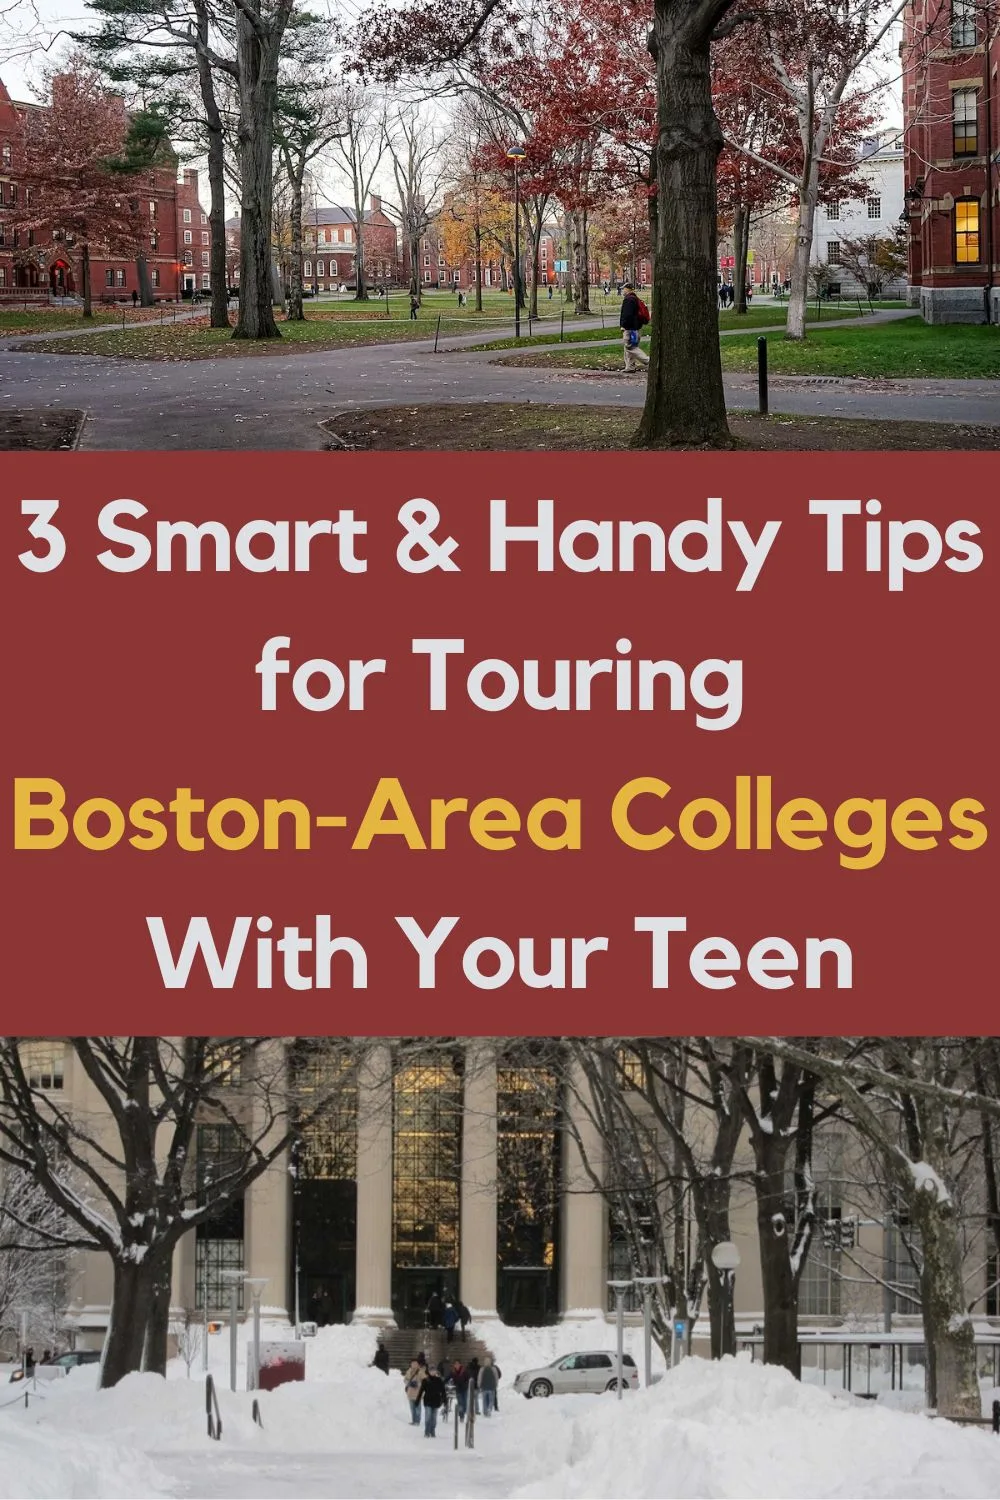 boston is a great first place to go on college tours with your teen. i tell you where to stay, how to get around and where to break for coffee along the way.